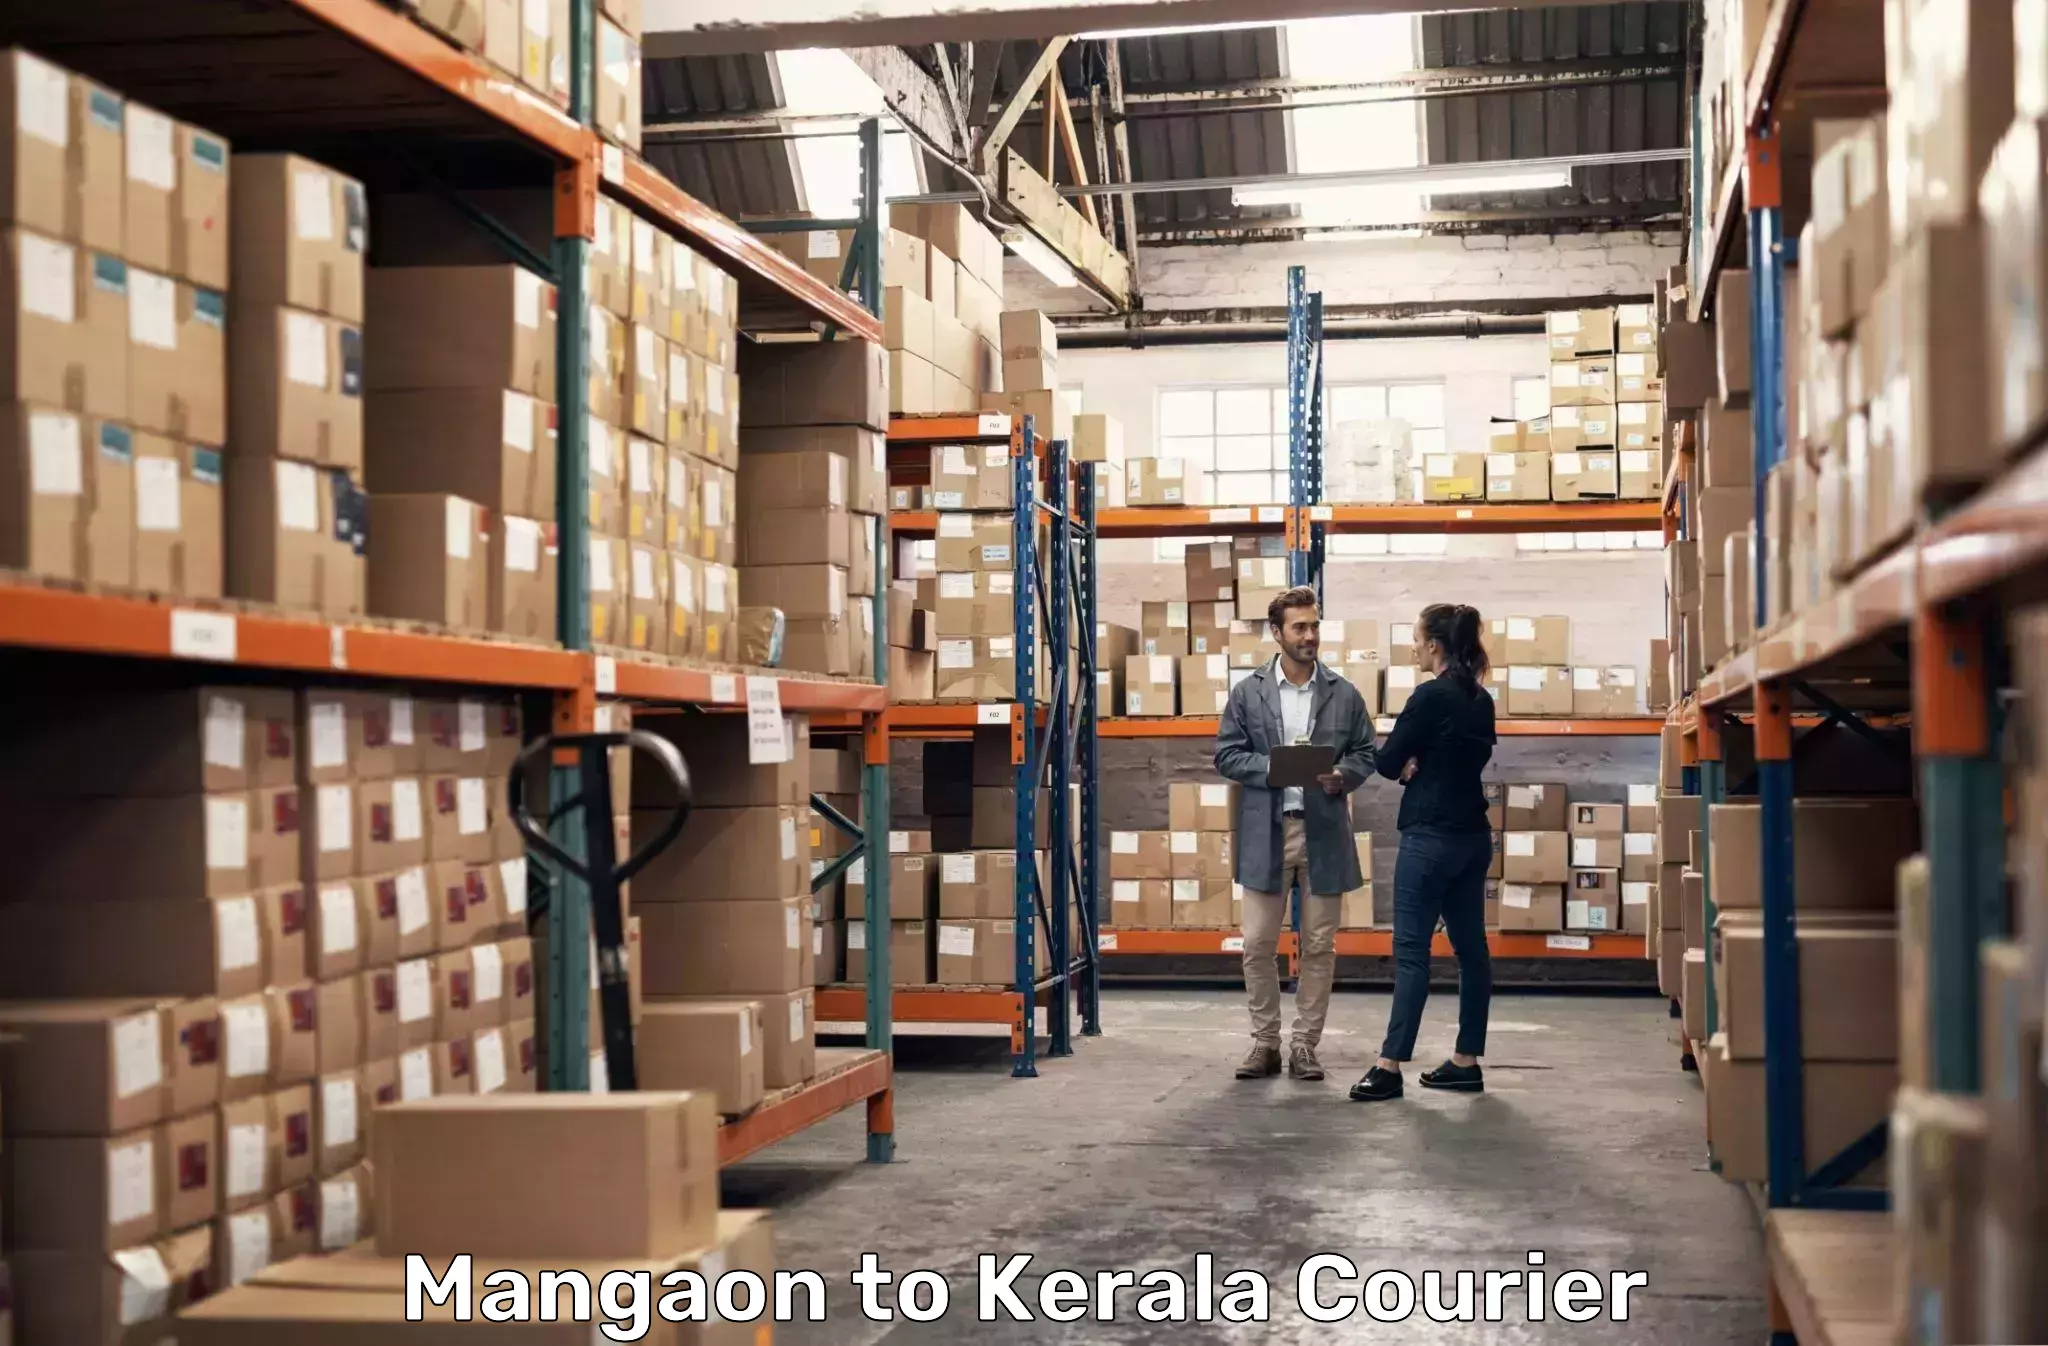 Reliable parcel services Mangaon to Kerala